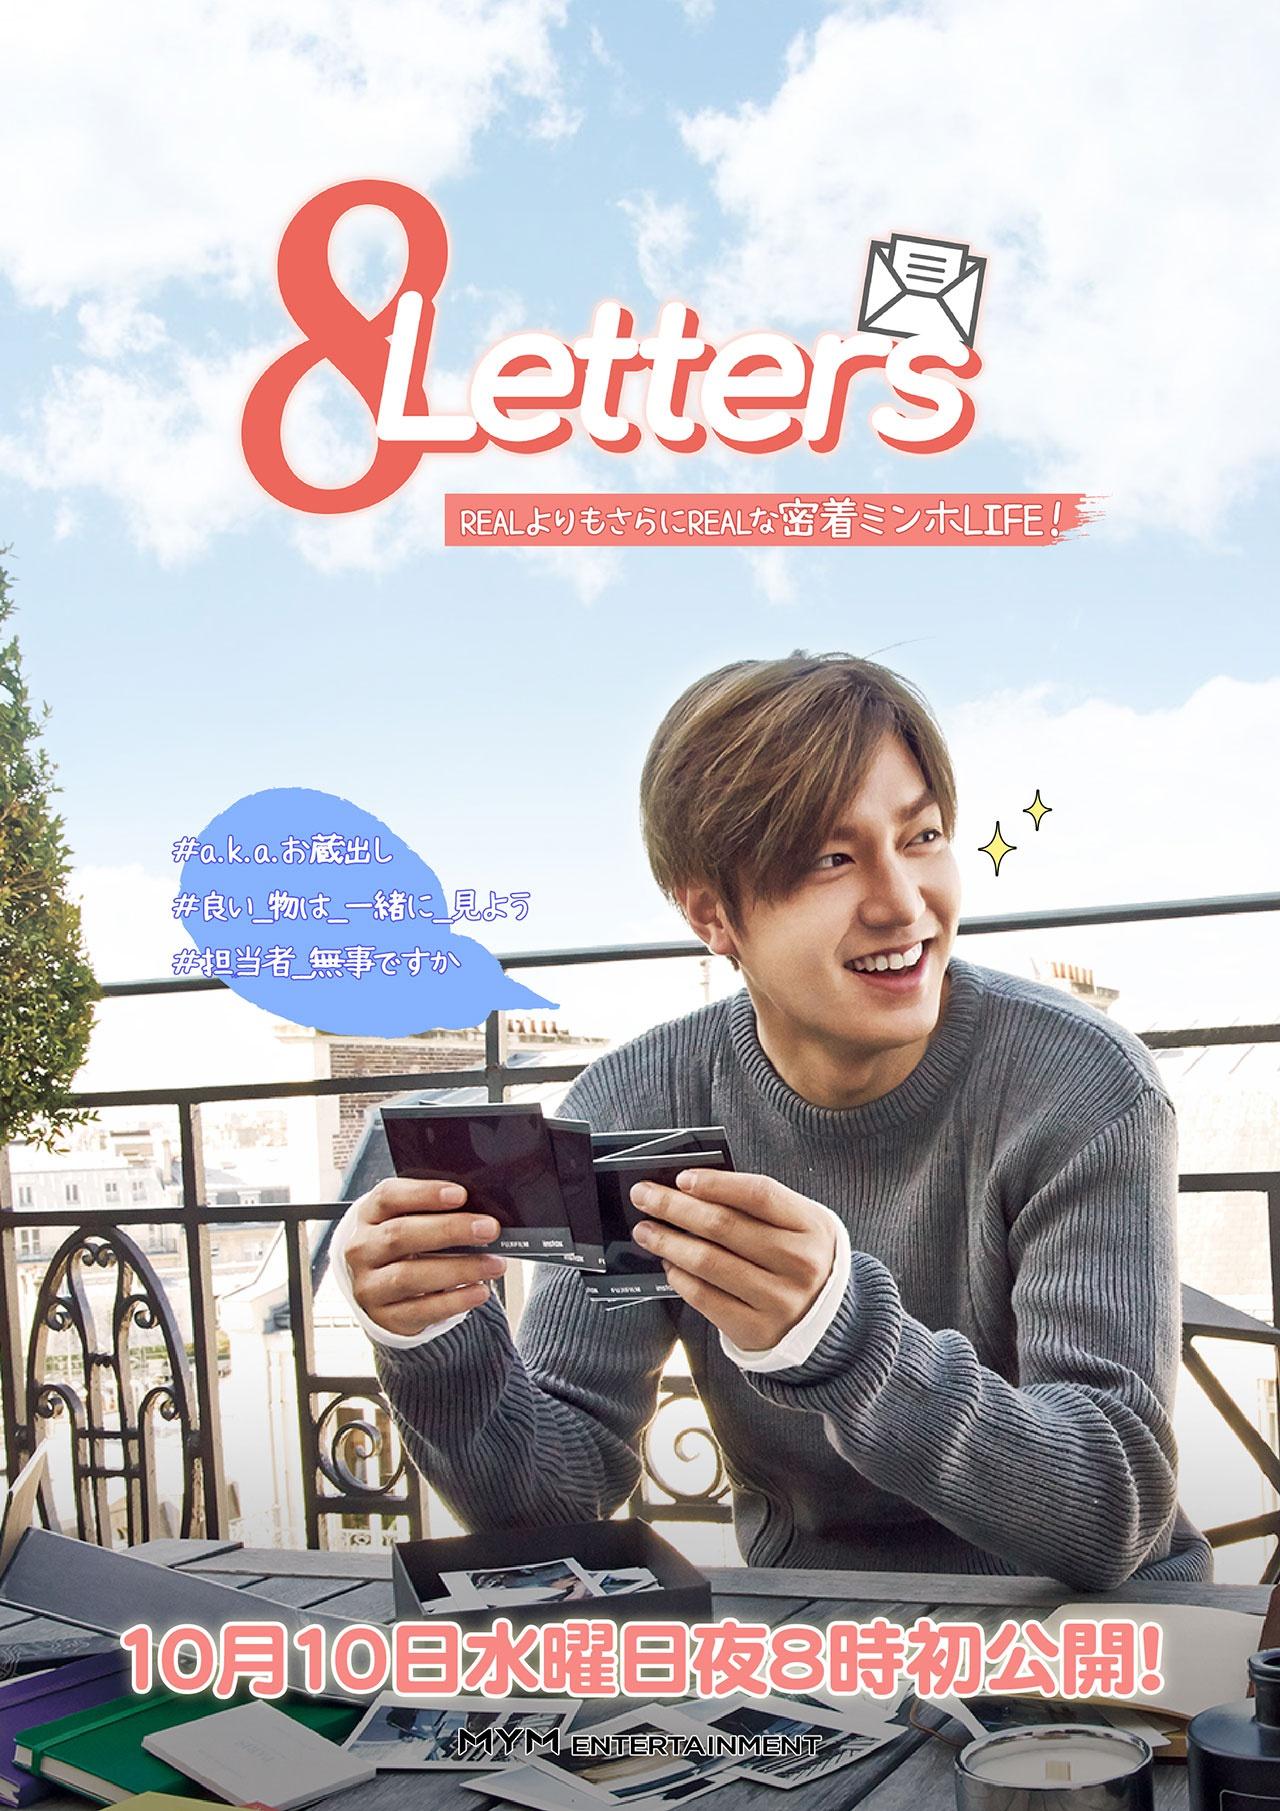 8Letters